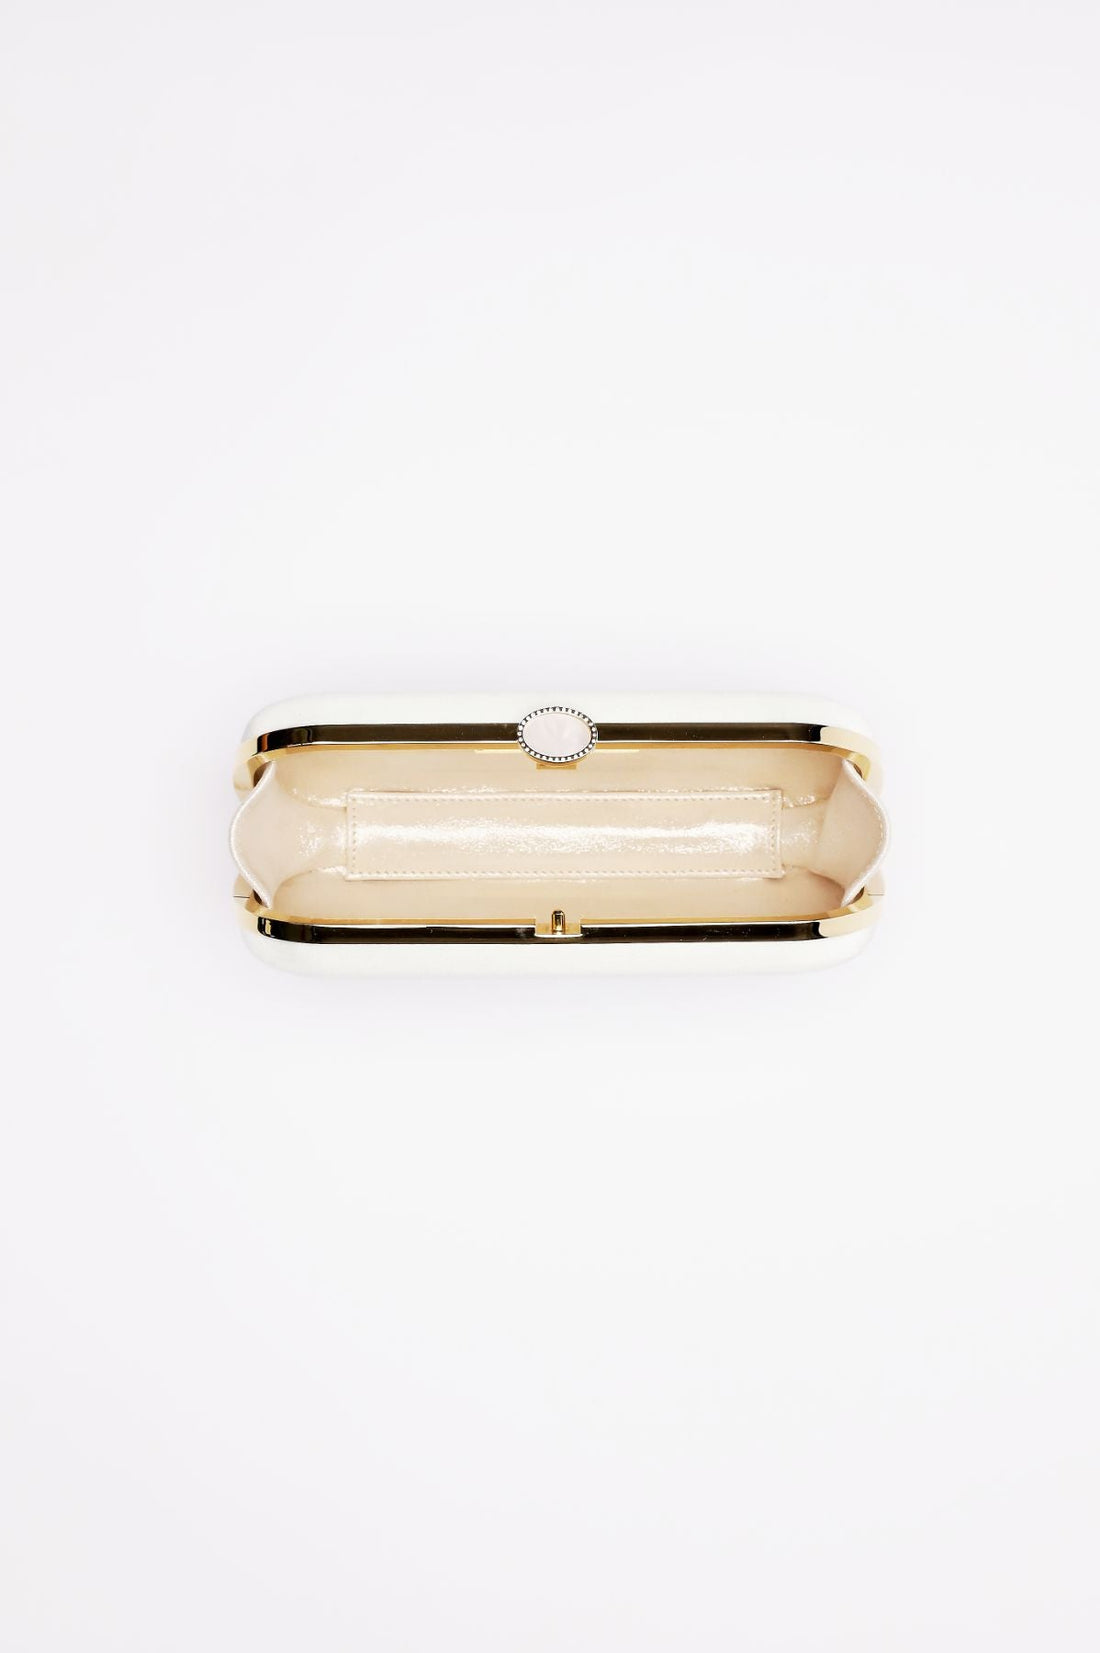 Top open view of Bella Clutch in Ivory white satin with gold hardware frame.